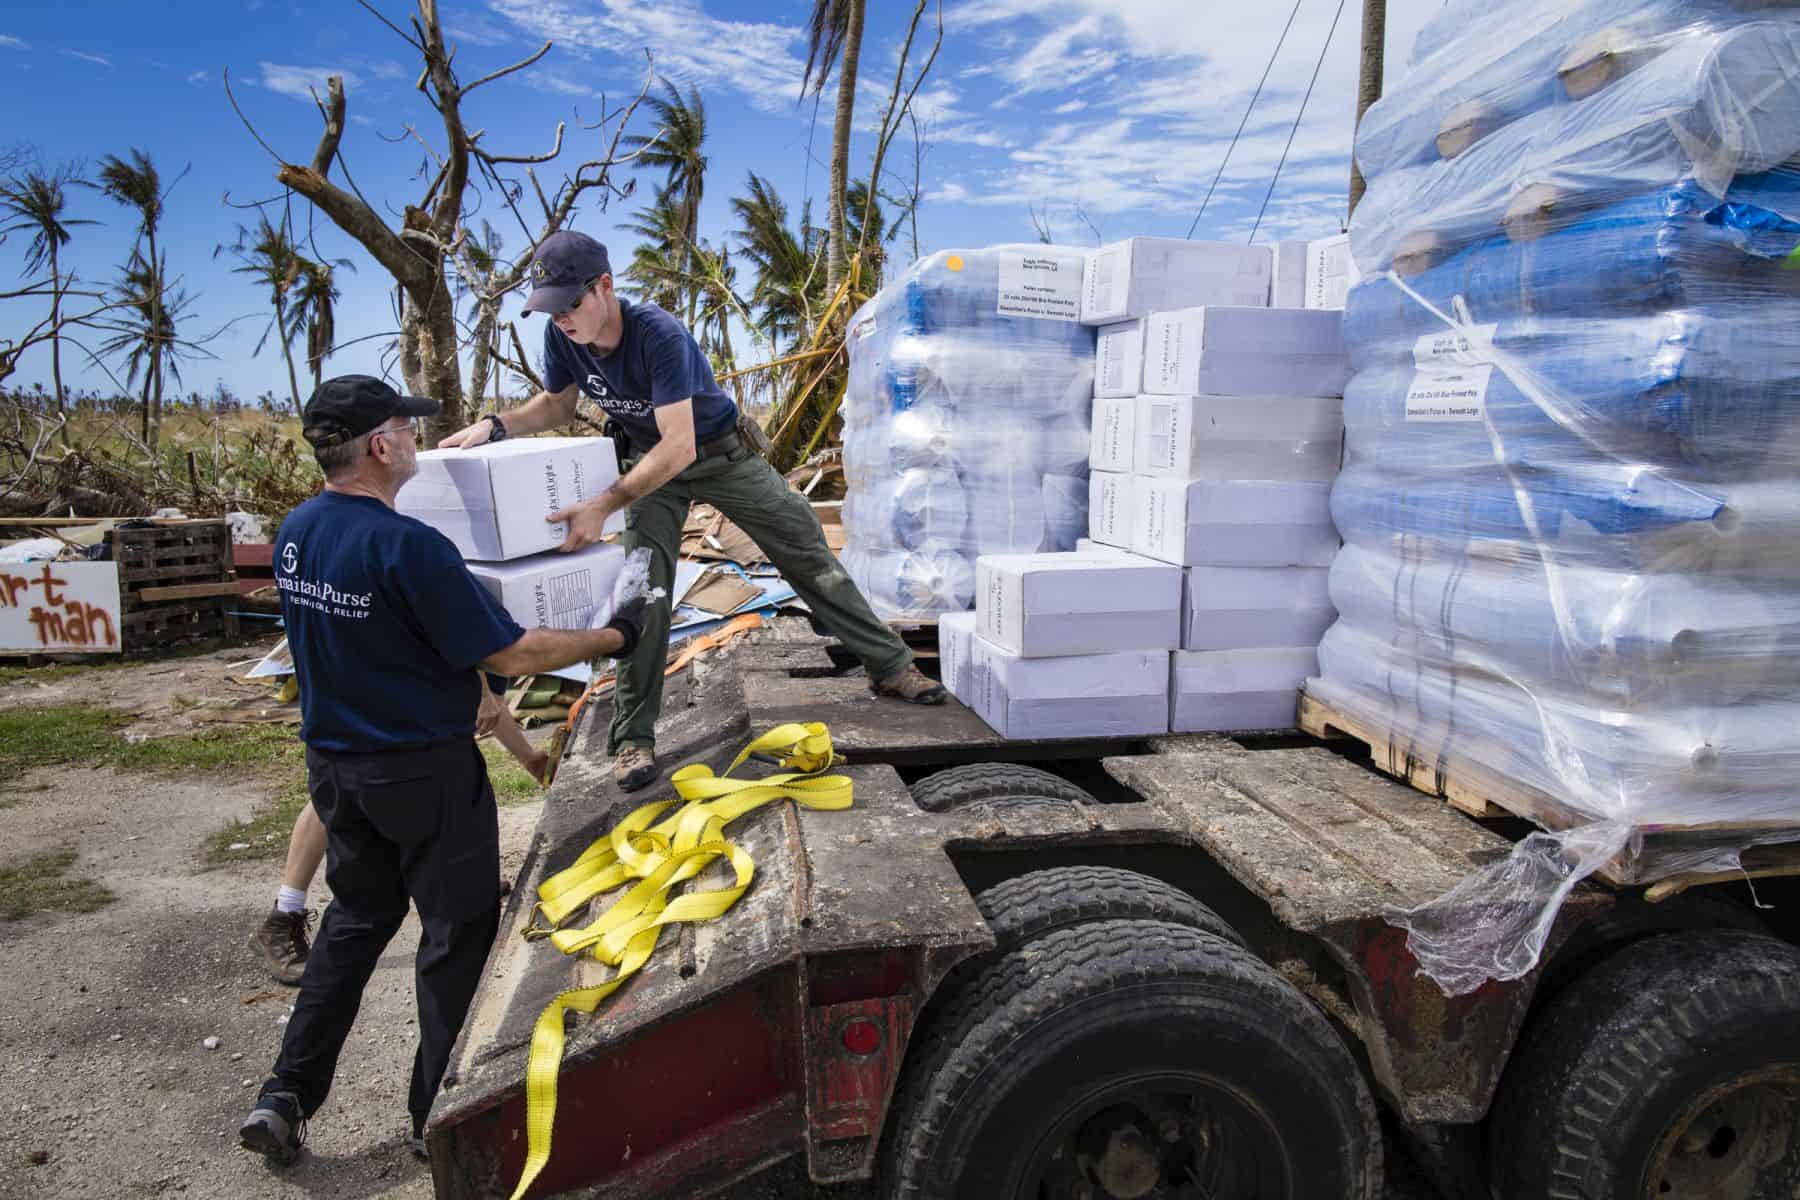 Disaster response specialists unload water filtration units, solar lights, and emergency shelter materials to be distributed to families devastated by Typhoon Yutu.